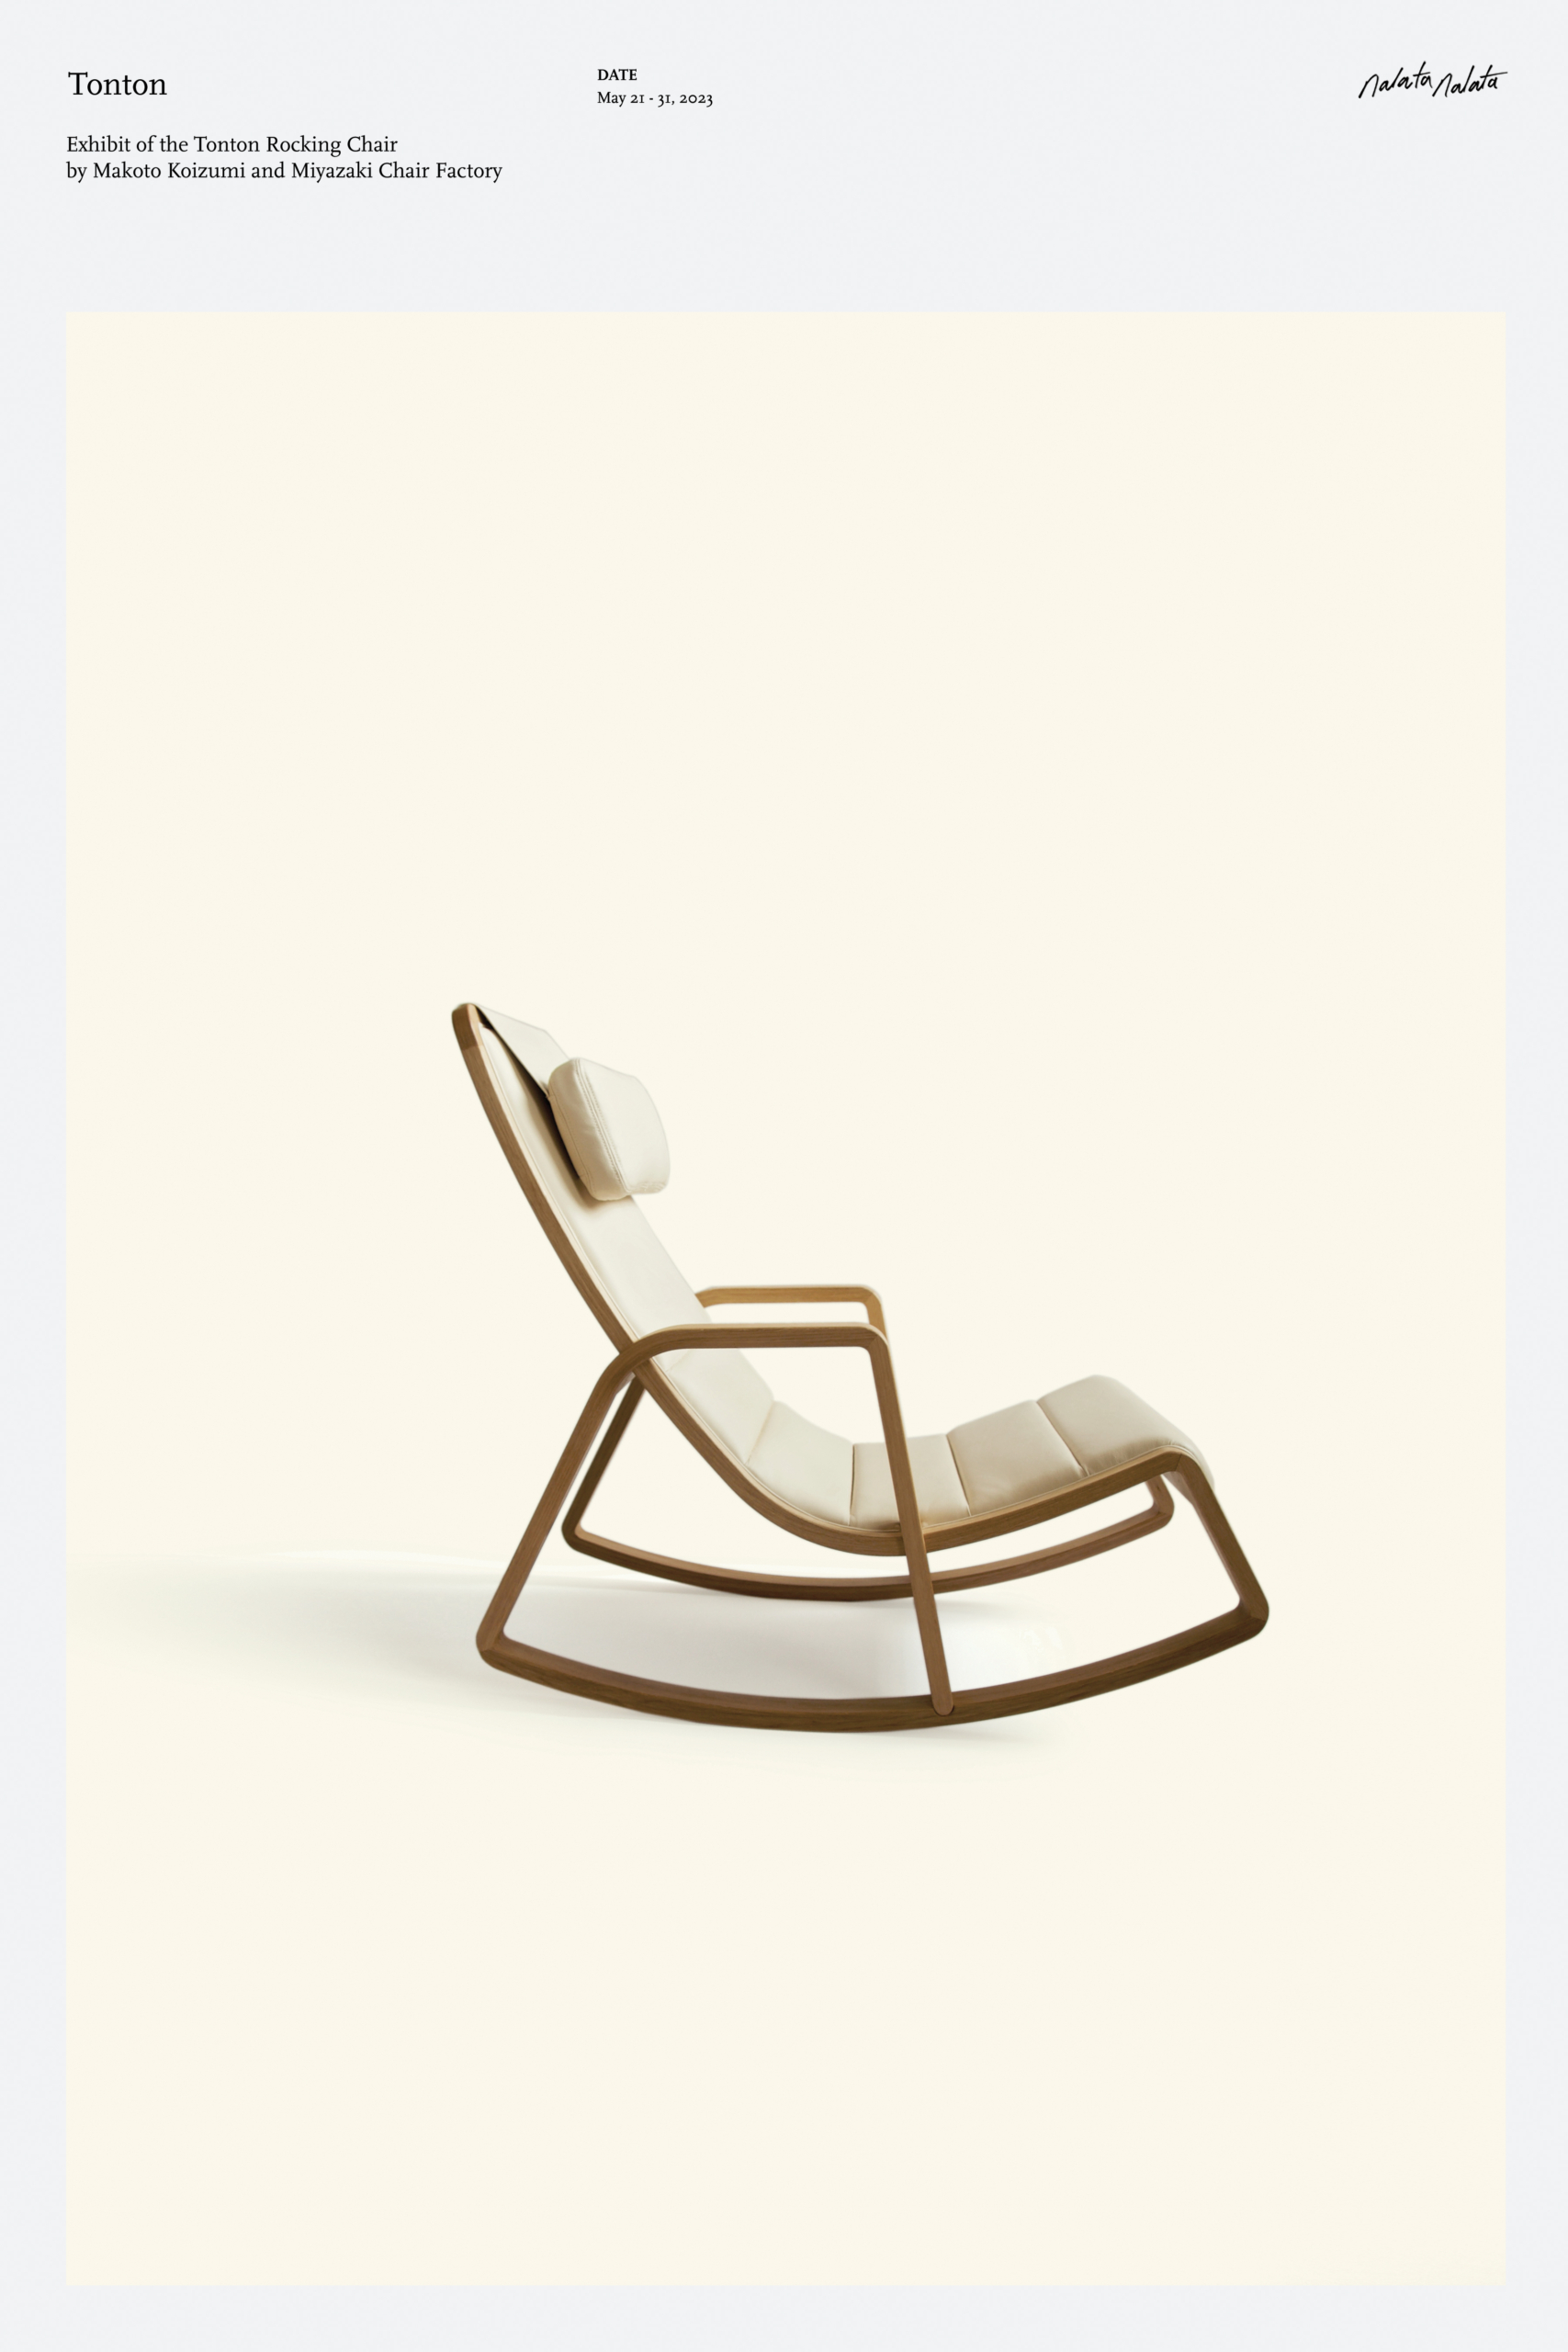 Exhibition Poster for the tonton rocking chair designed by Makoto Koizumi and Miyazaki Chair Factory